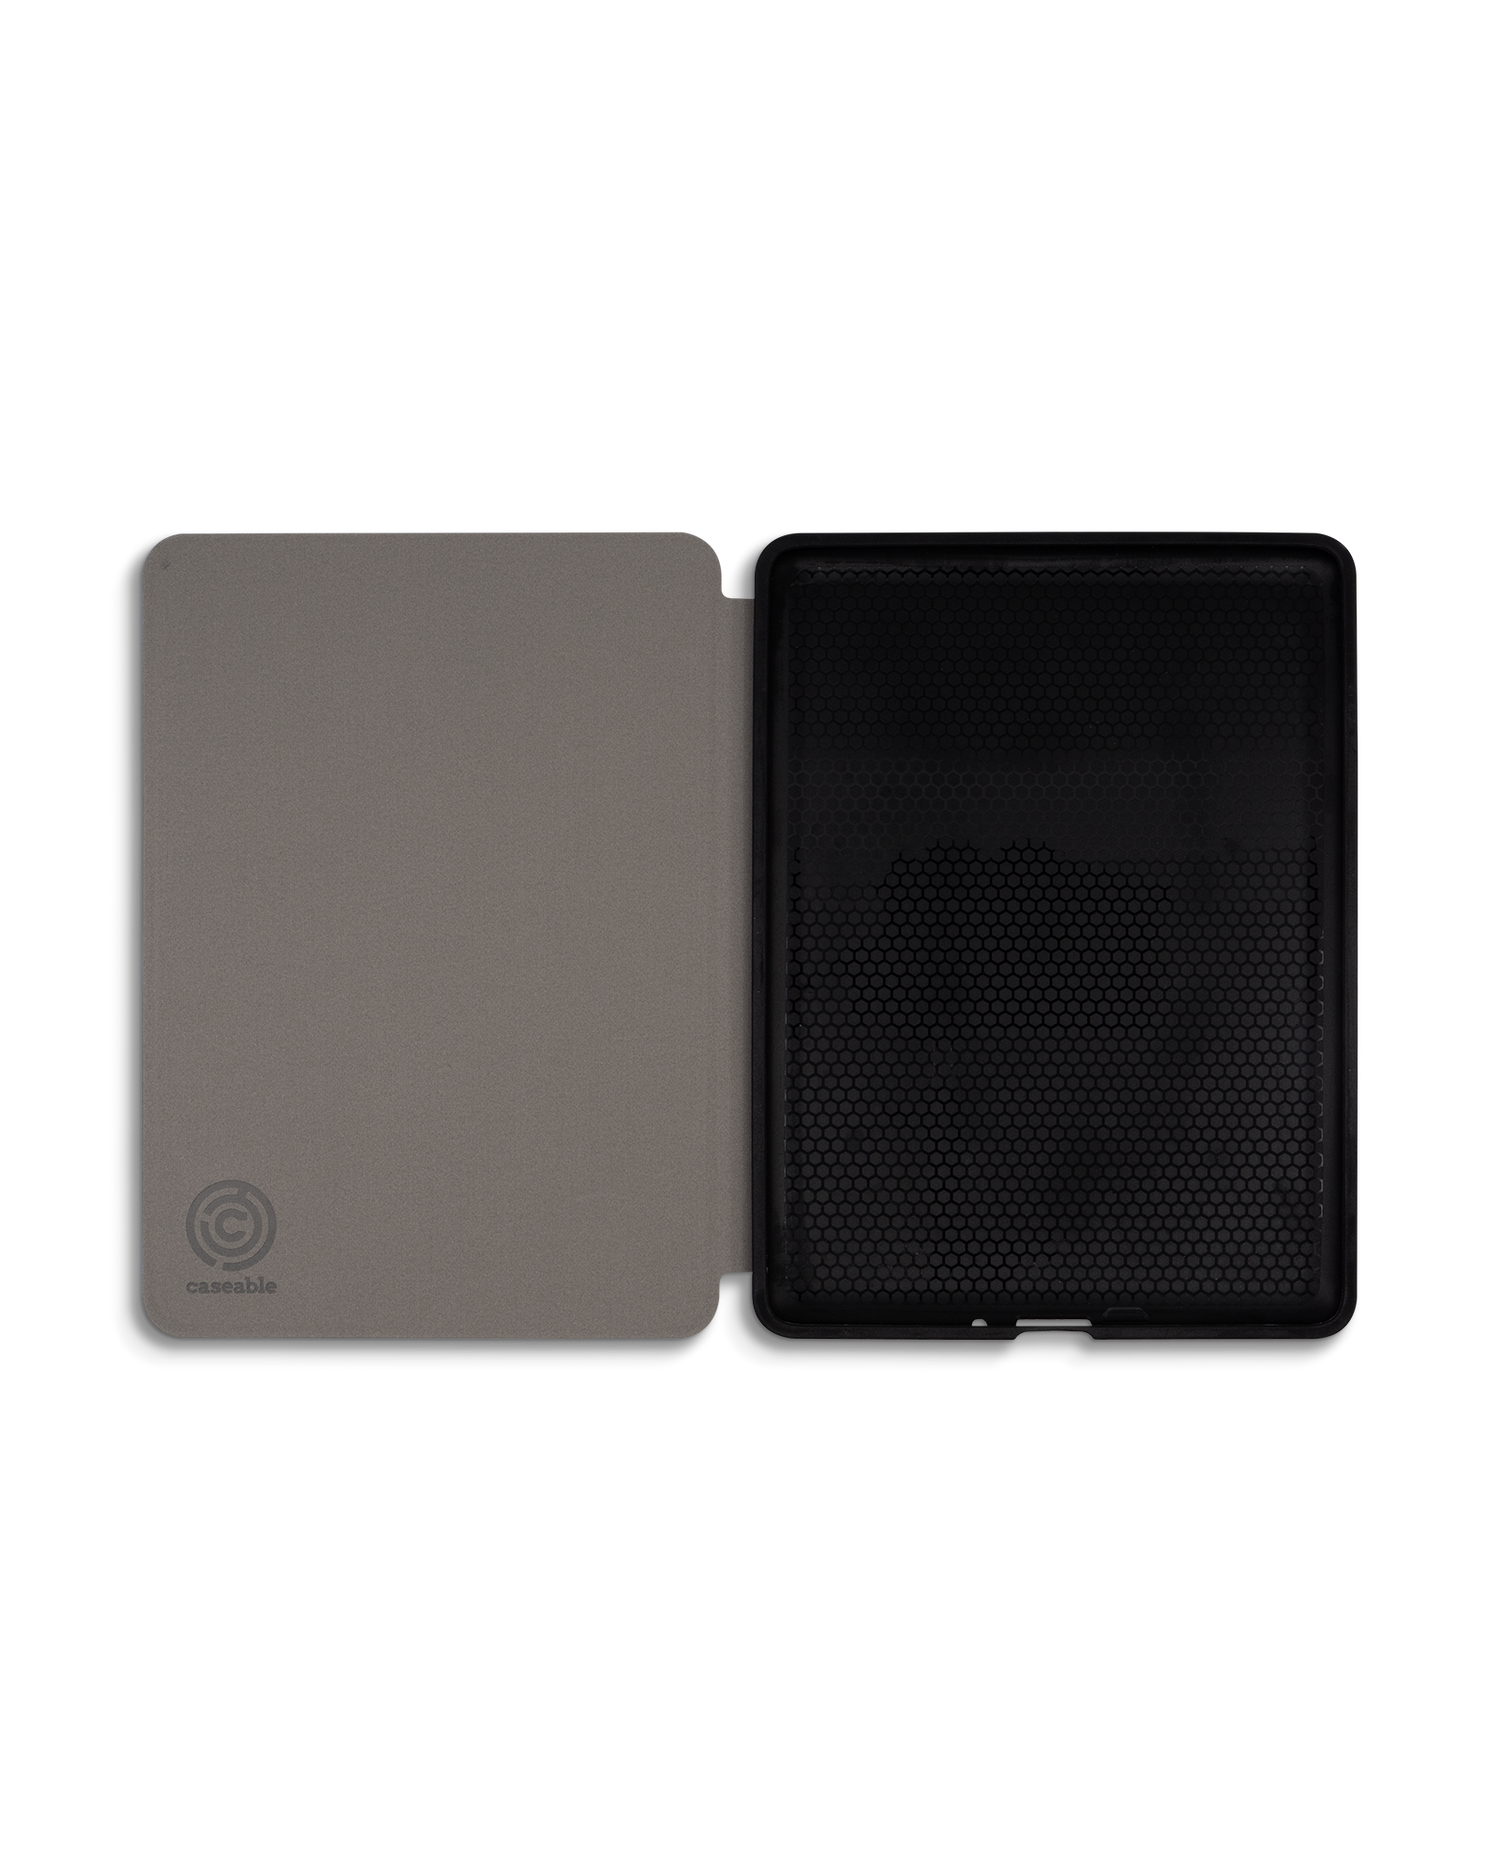 Fugus! eReader Smart Case for Amazon Kindle Paperwhite 5 (2021), Amazon Kindle Paperwhite 5 Signature Edition (2021): Opened interior view